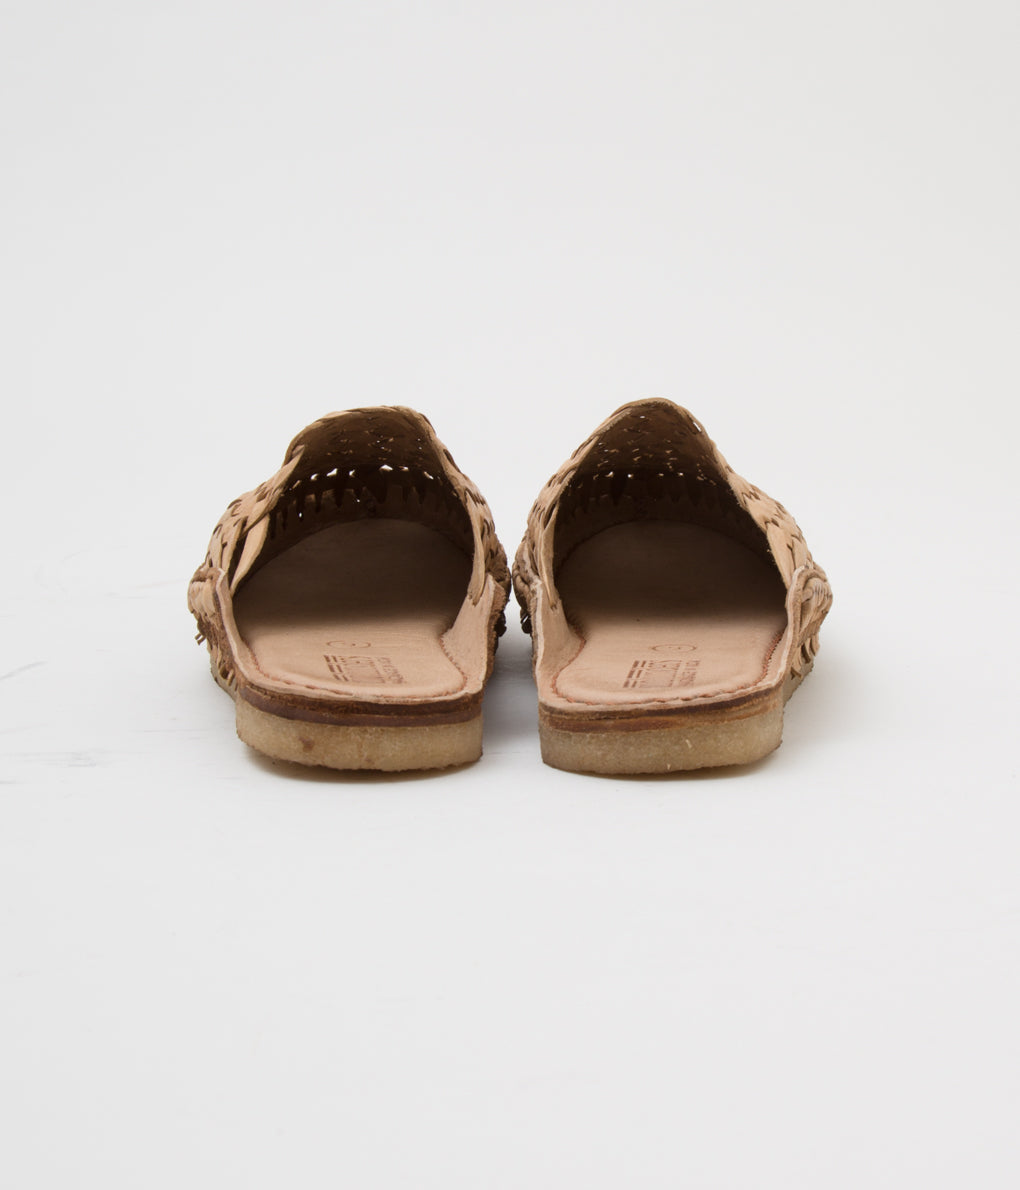 MOHINDERS "WOVEN CITY SLIPPER"(NATURAL)